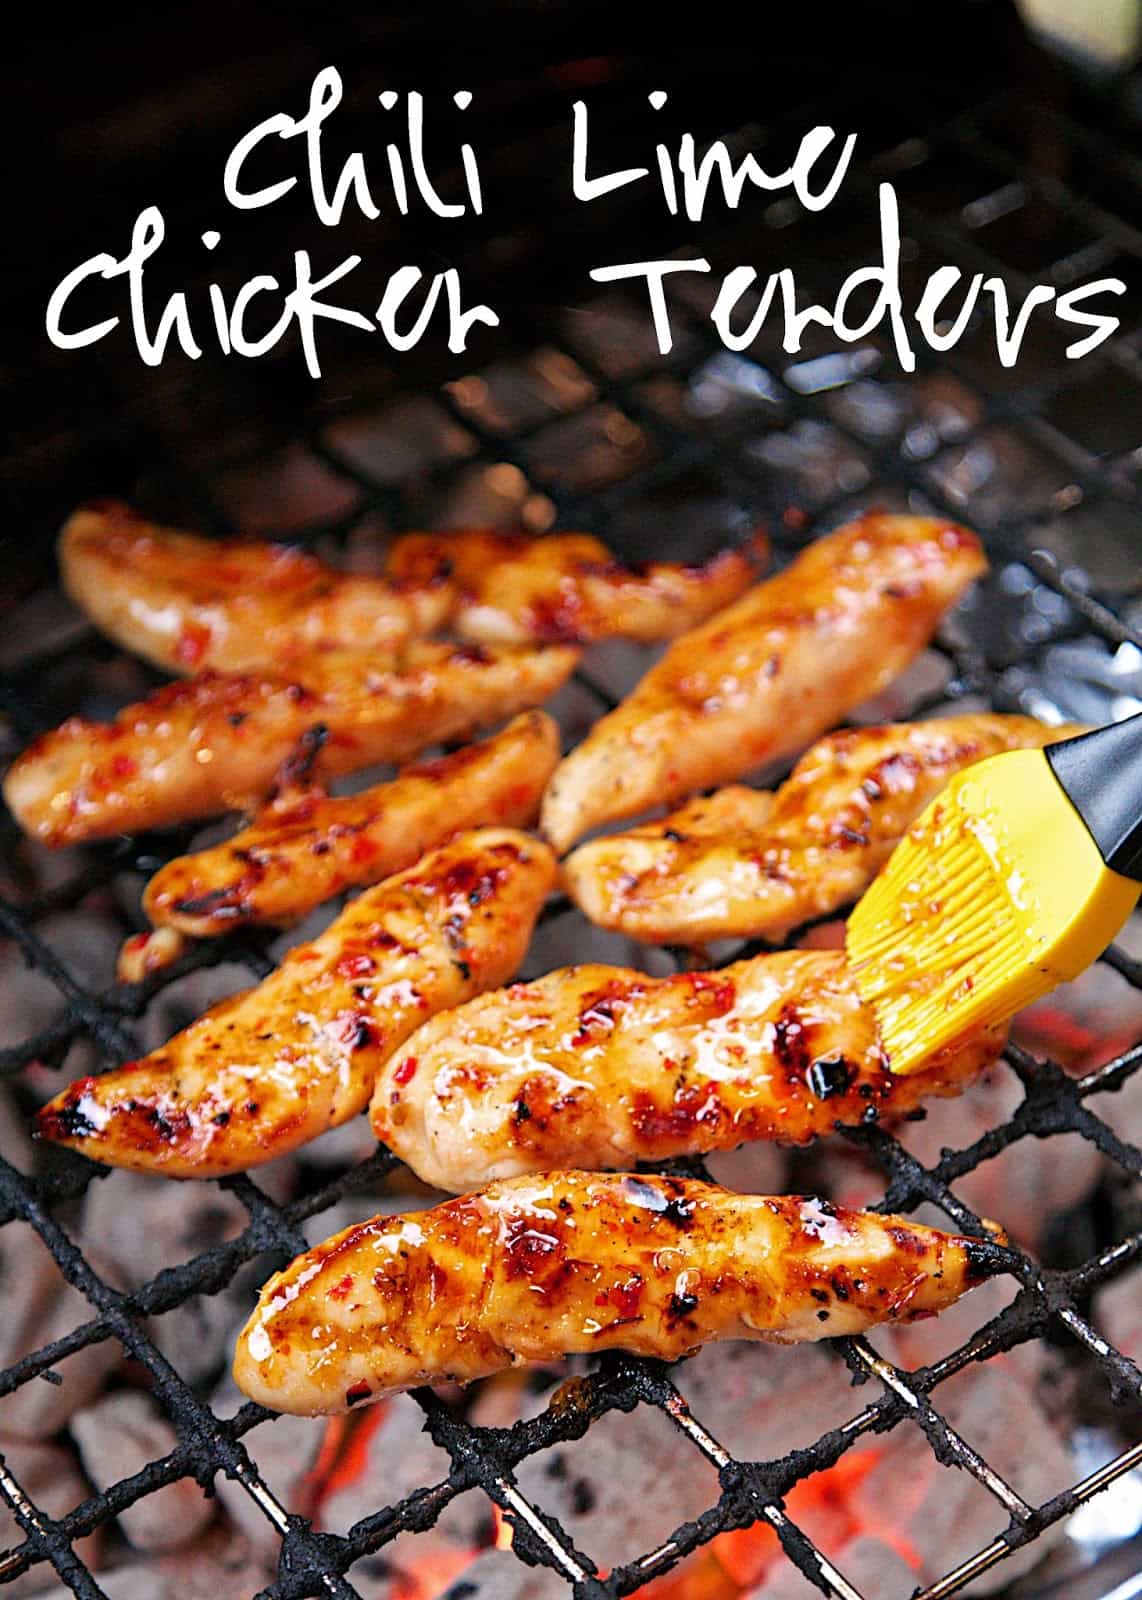 Chili Lime Chicken Tenders Recipe - only 4 simple ingredients! Chicken, sweet chili sauce, lime juice and honey. Tons of great flavors! We ate this two days in a row - can't get enough of this simple grilled chicken recipe!